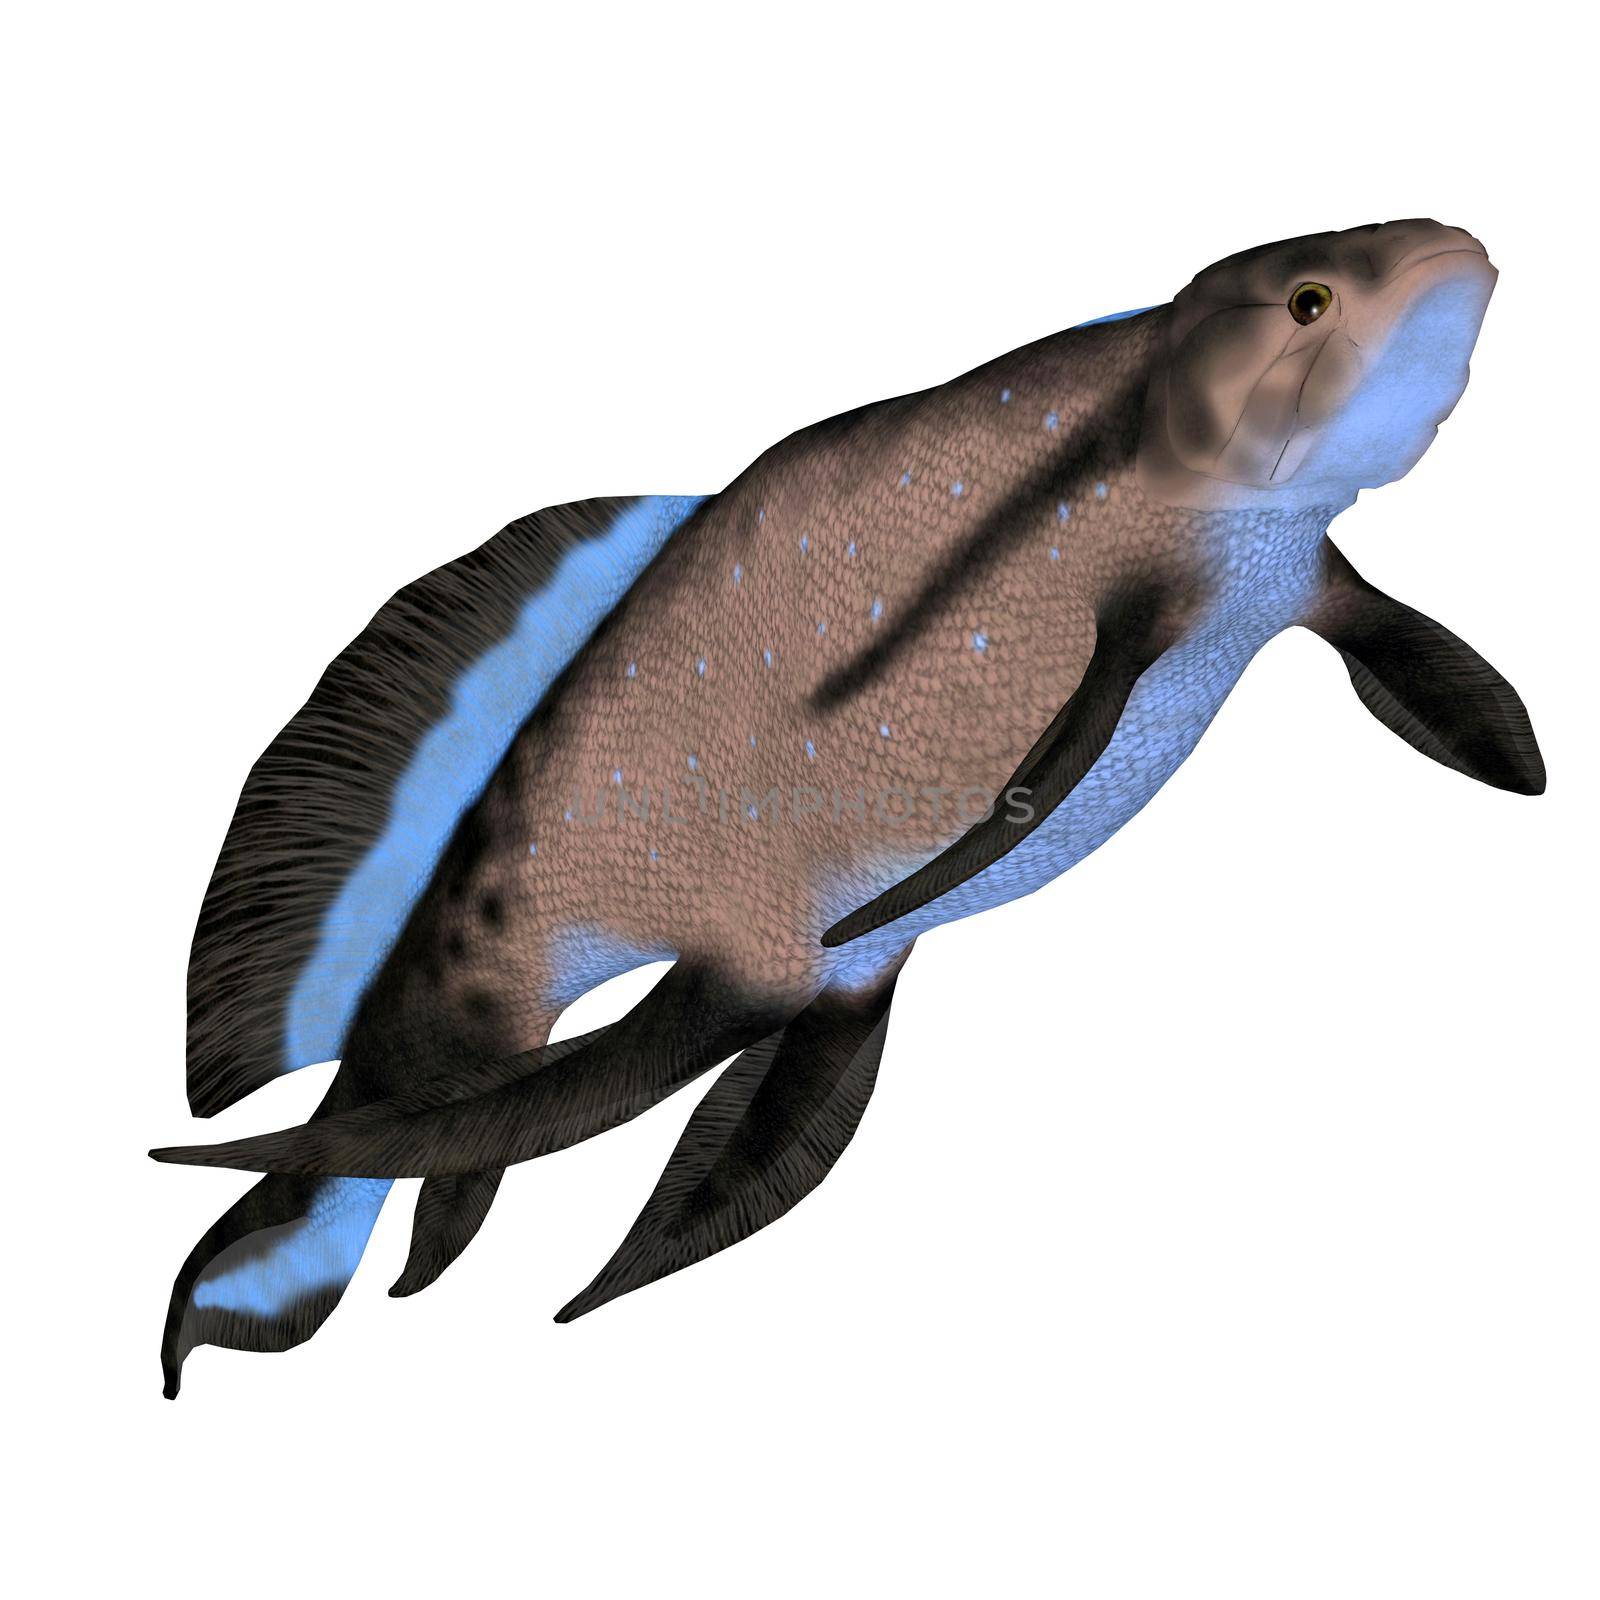 Scaumenacia is an extinct predatory fish that lived in marine environments during the Devonian Period.